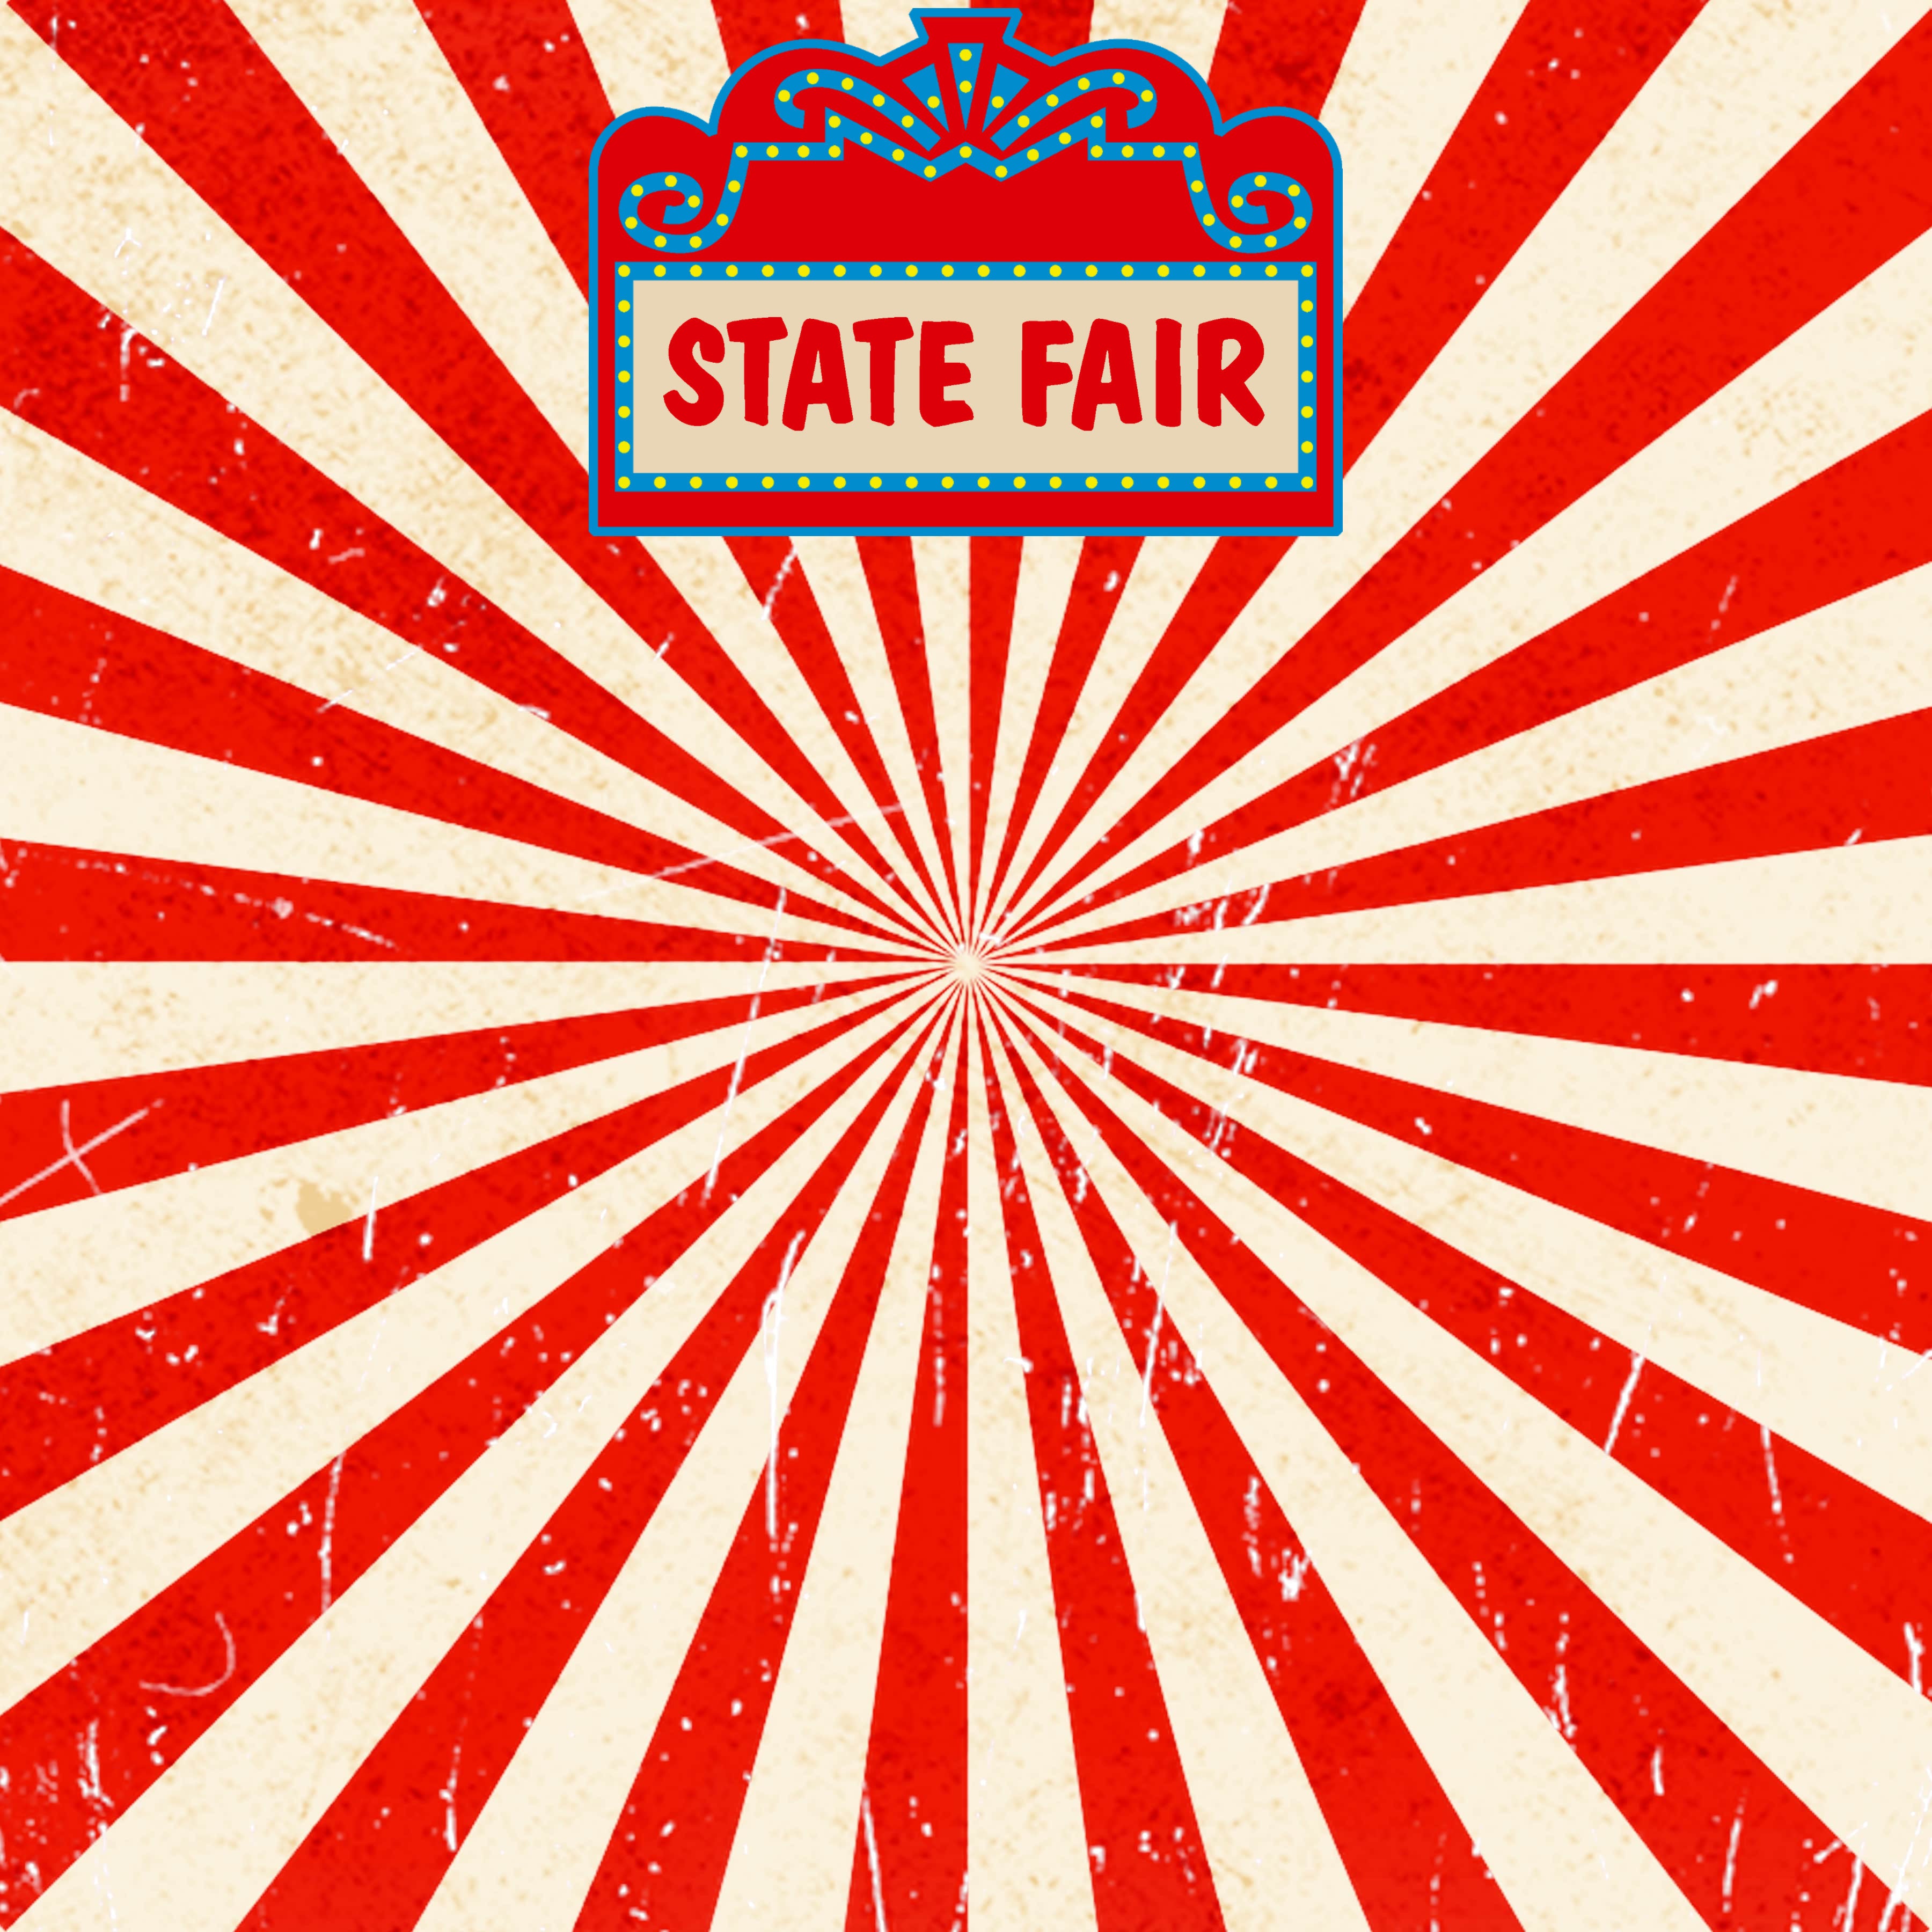 Fun At The Fair Collection State Fair 12 x 12 Double-Sided Scrapbook Paper by SSC Designs